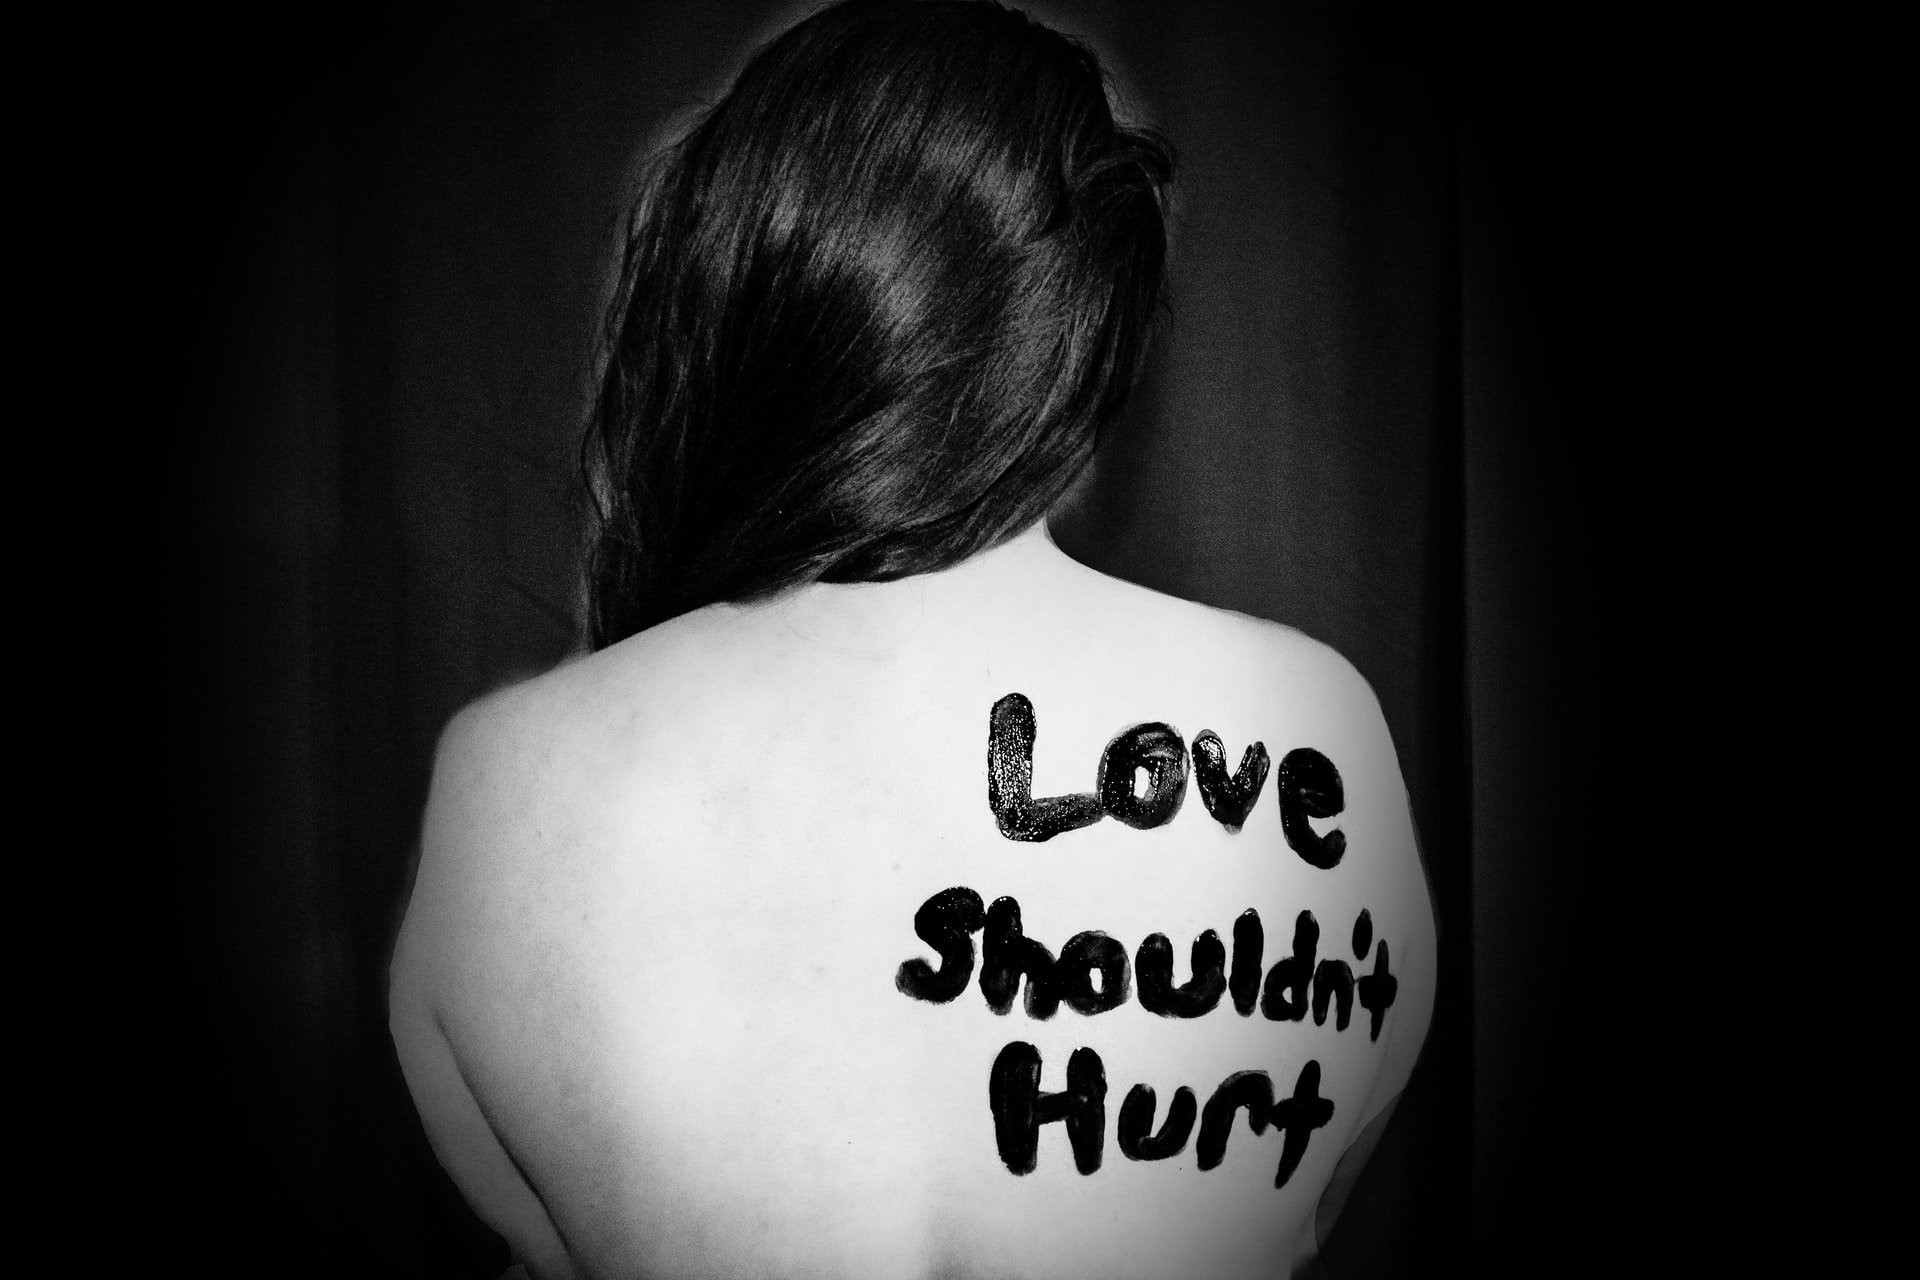 A girl with her back to the camera with the words 'Love Shouldn't Hurt' painted on